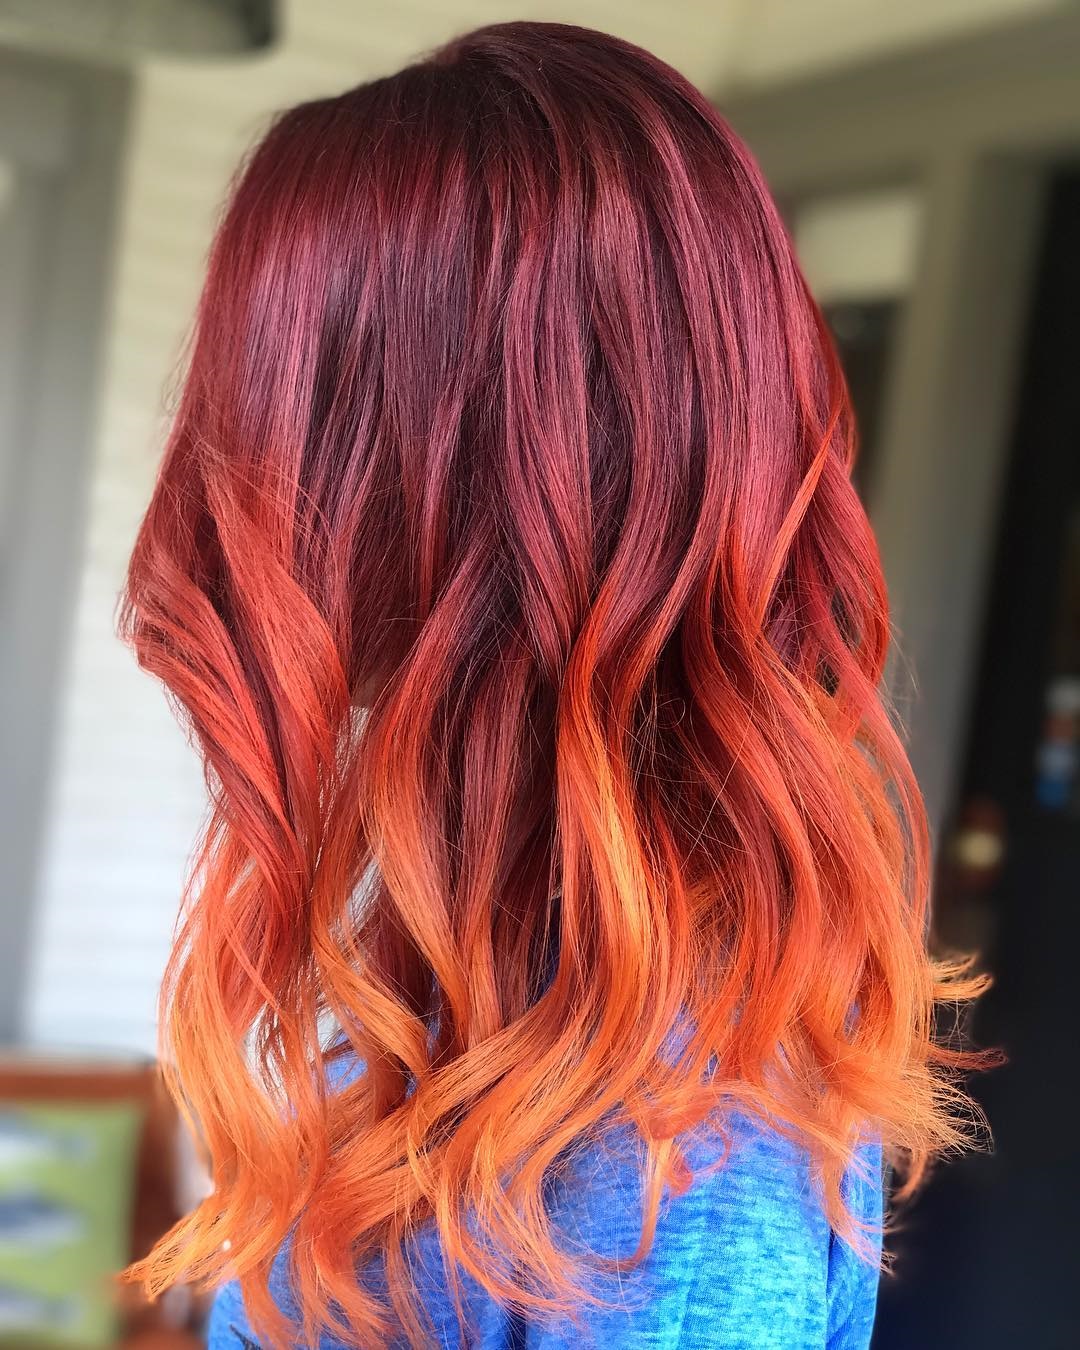 20-Radical-Styling-Ideas-For-Your-Red-Ombre-Hair - Medfield Public